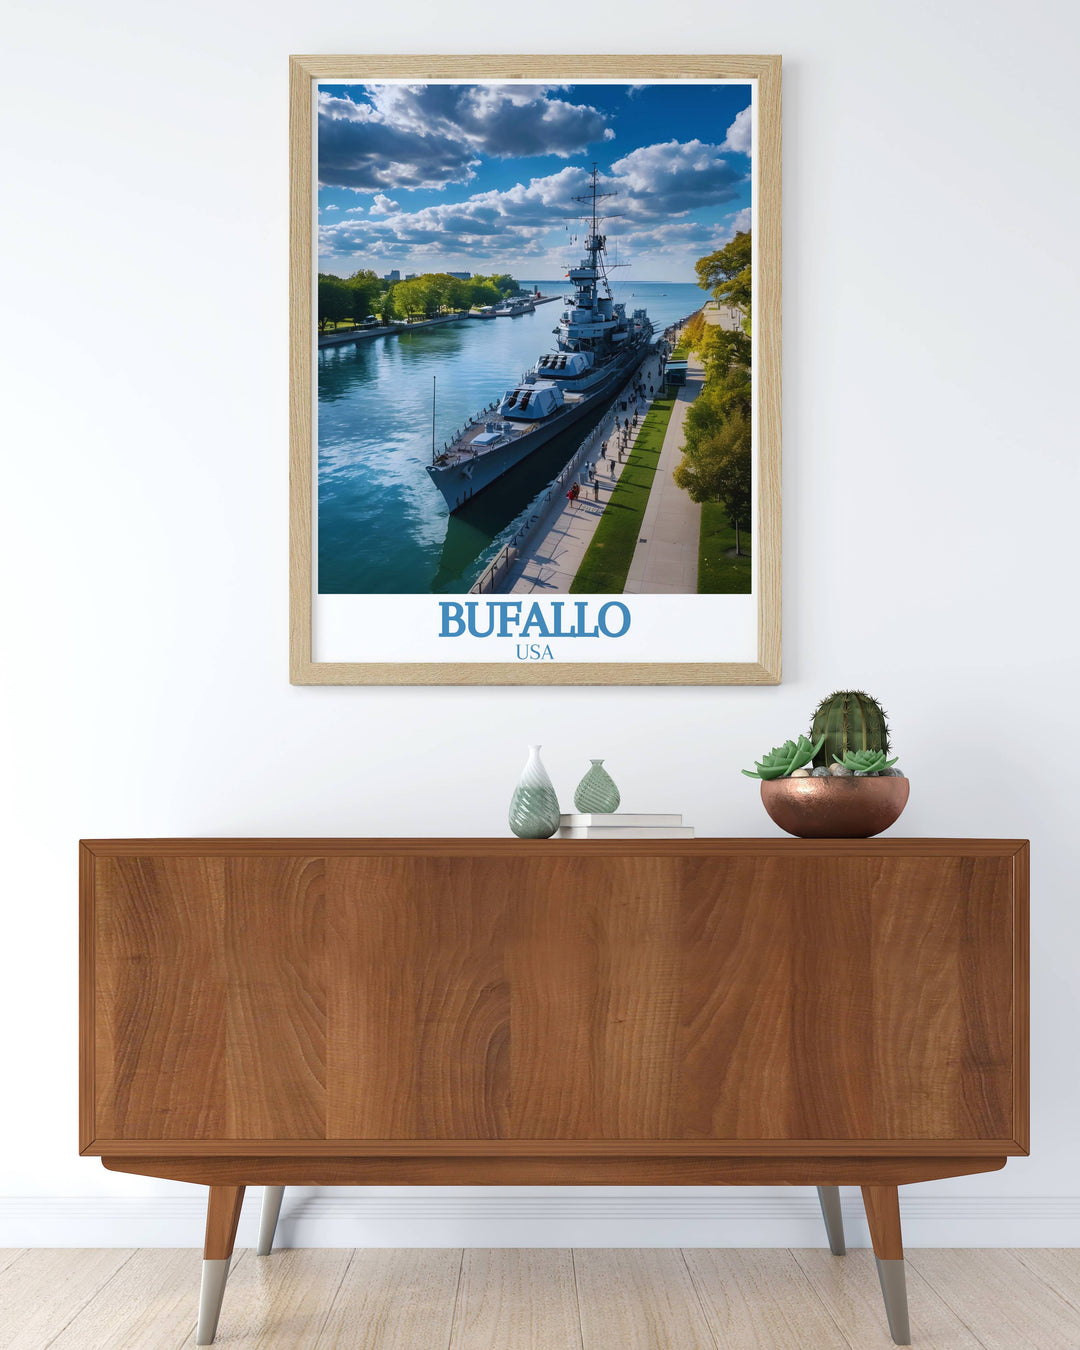 Stunning Buffalo Naval and Military Park wall art and photography perfect for enhancing your home decor with a touch of sophistication showcasing the grandeur of Buffalos heritage and iconic landmarks